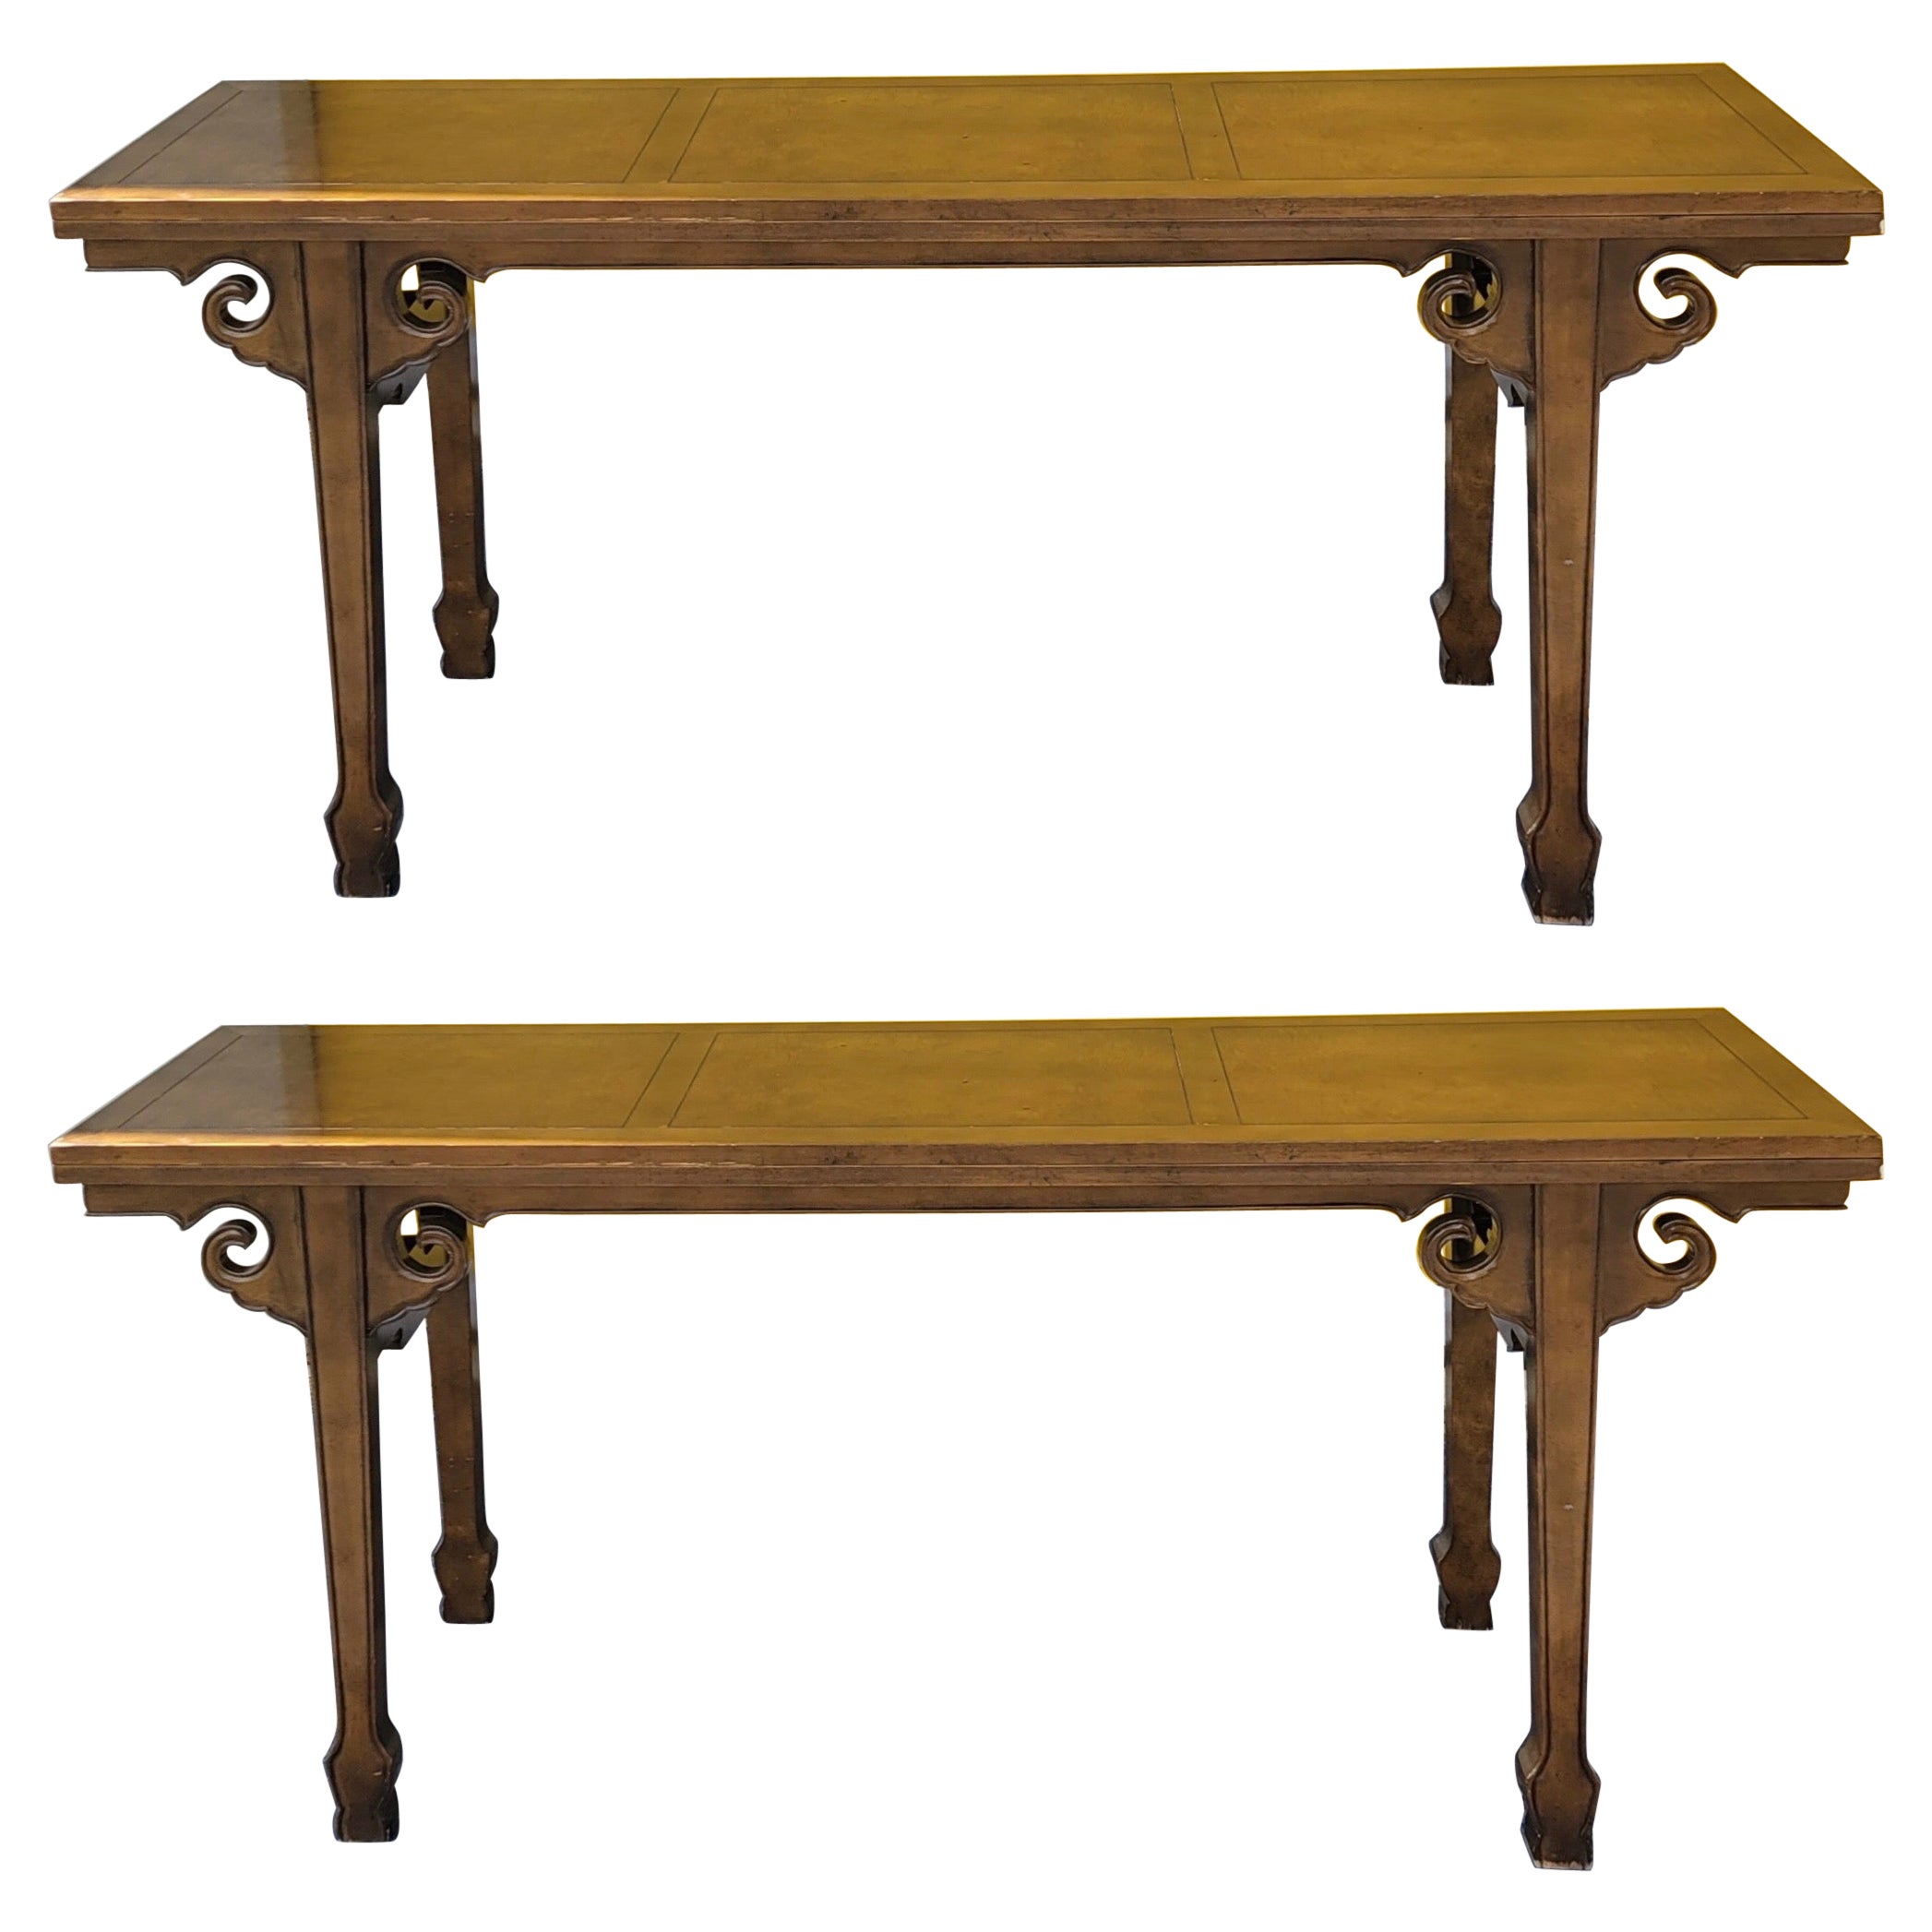 1970s Ming Style Carved Walnut Draw Leaf Alter / Console Tables by Drexel, Pair For Sale